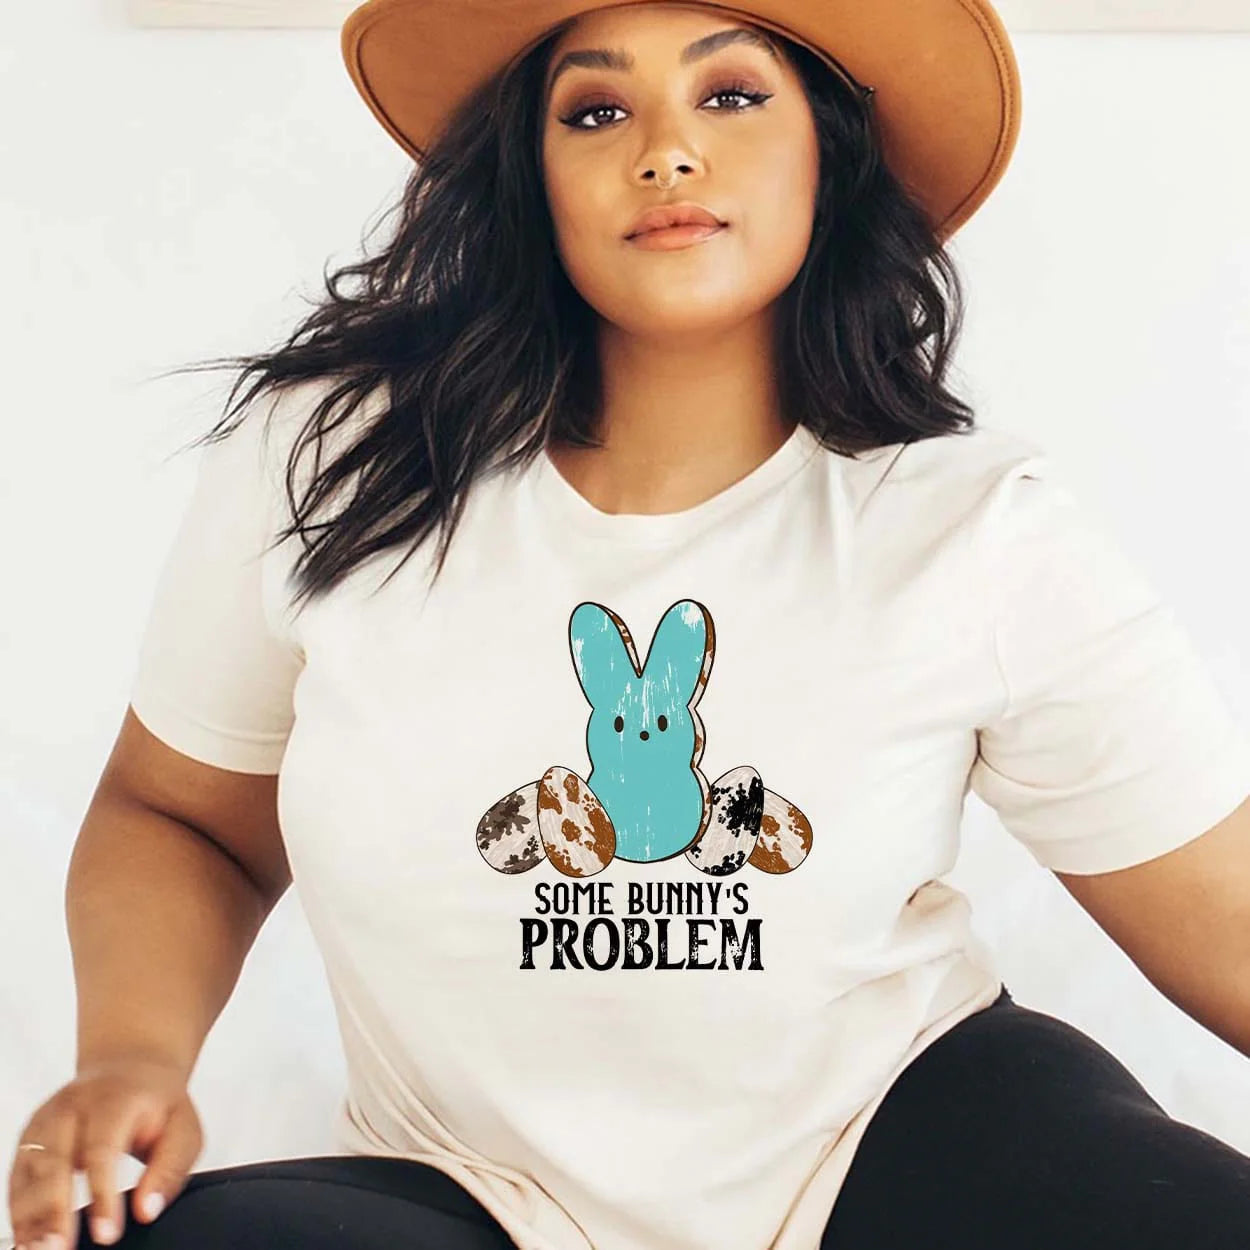 A cream colored short sleeve crew neck tee with a graphic of a blue Peep with a black and blue cow print egg on both sides with the text "Some Bunny's problem" Item is pictured on a plain white background